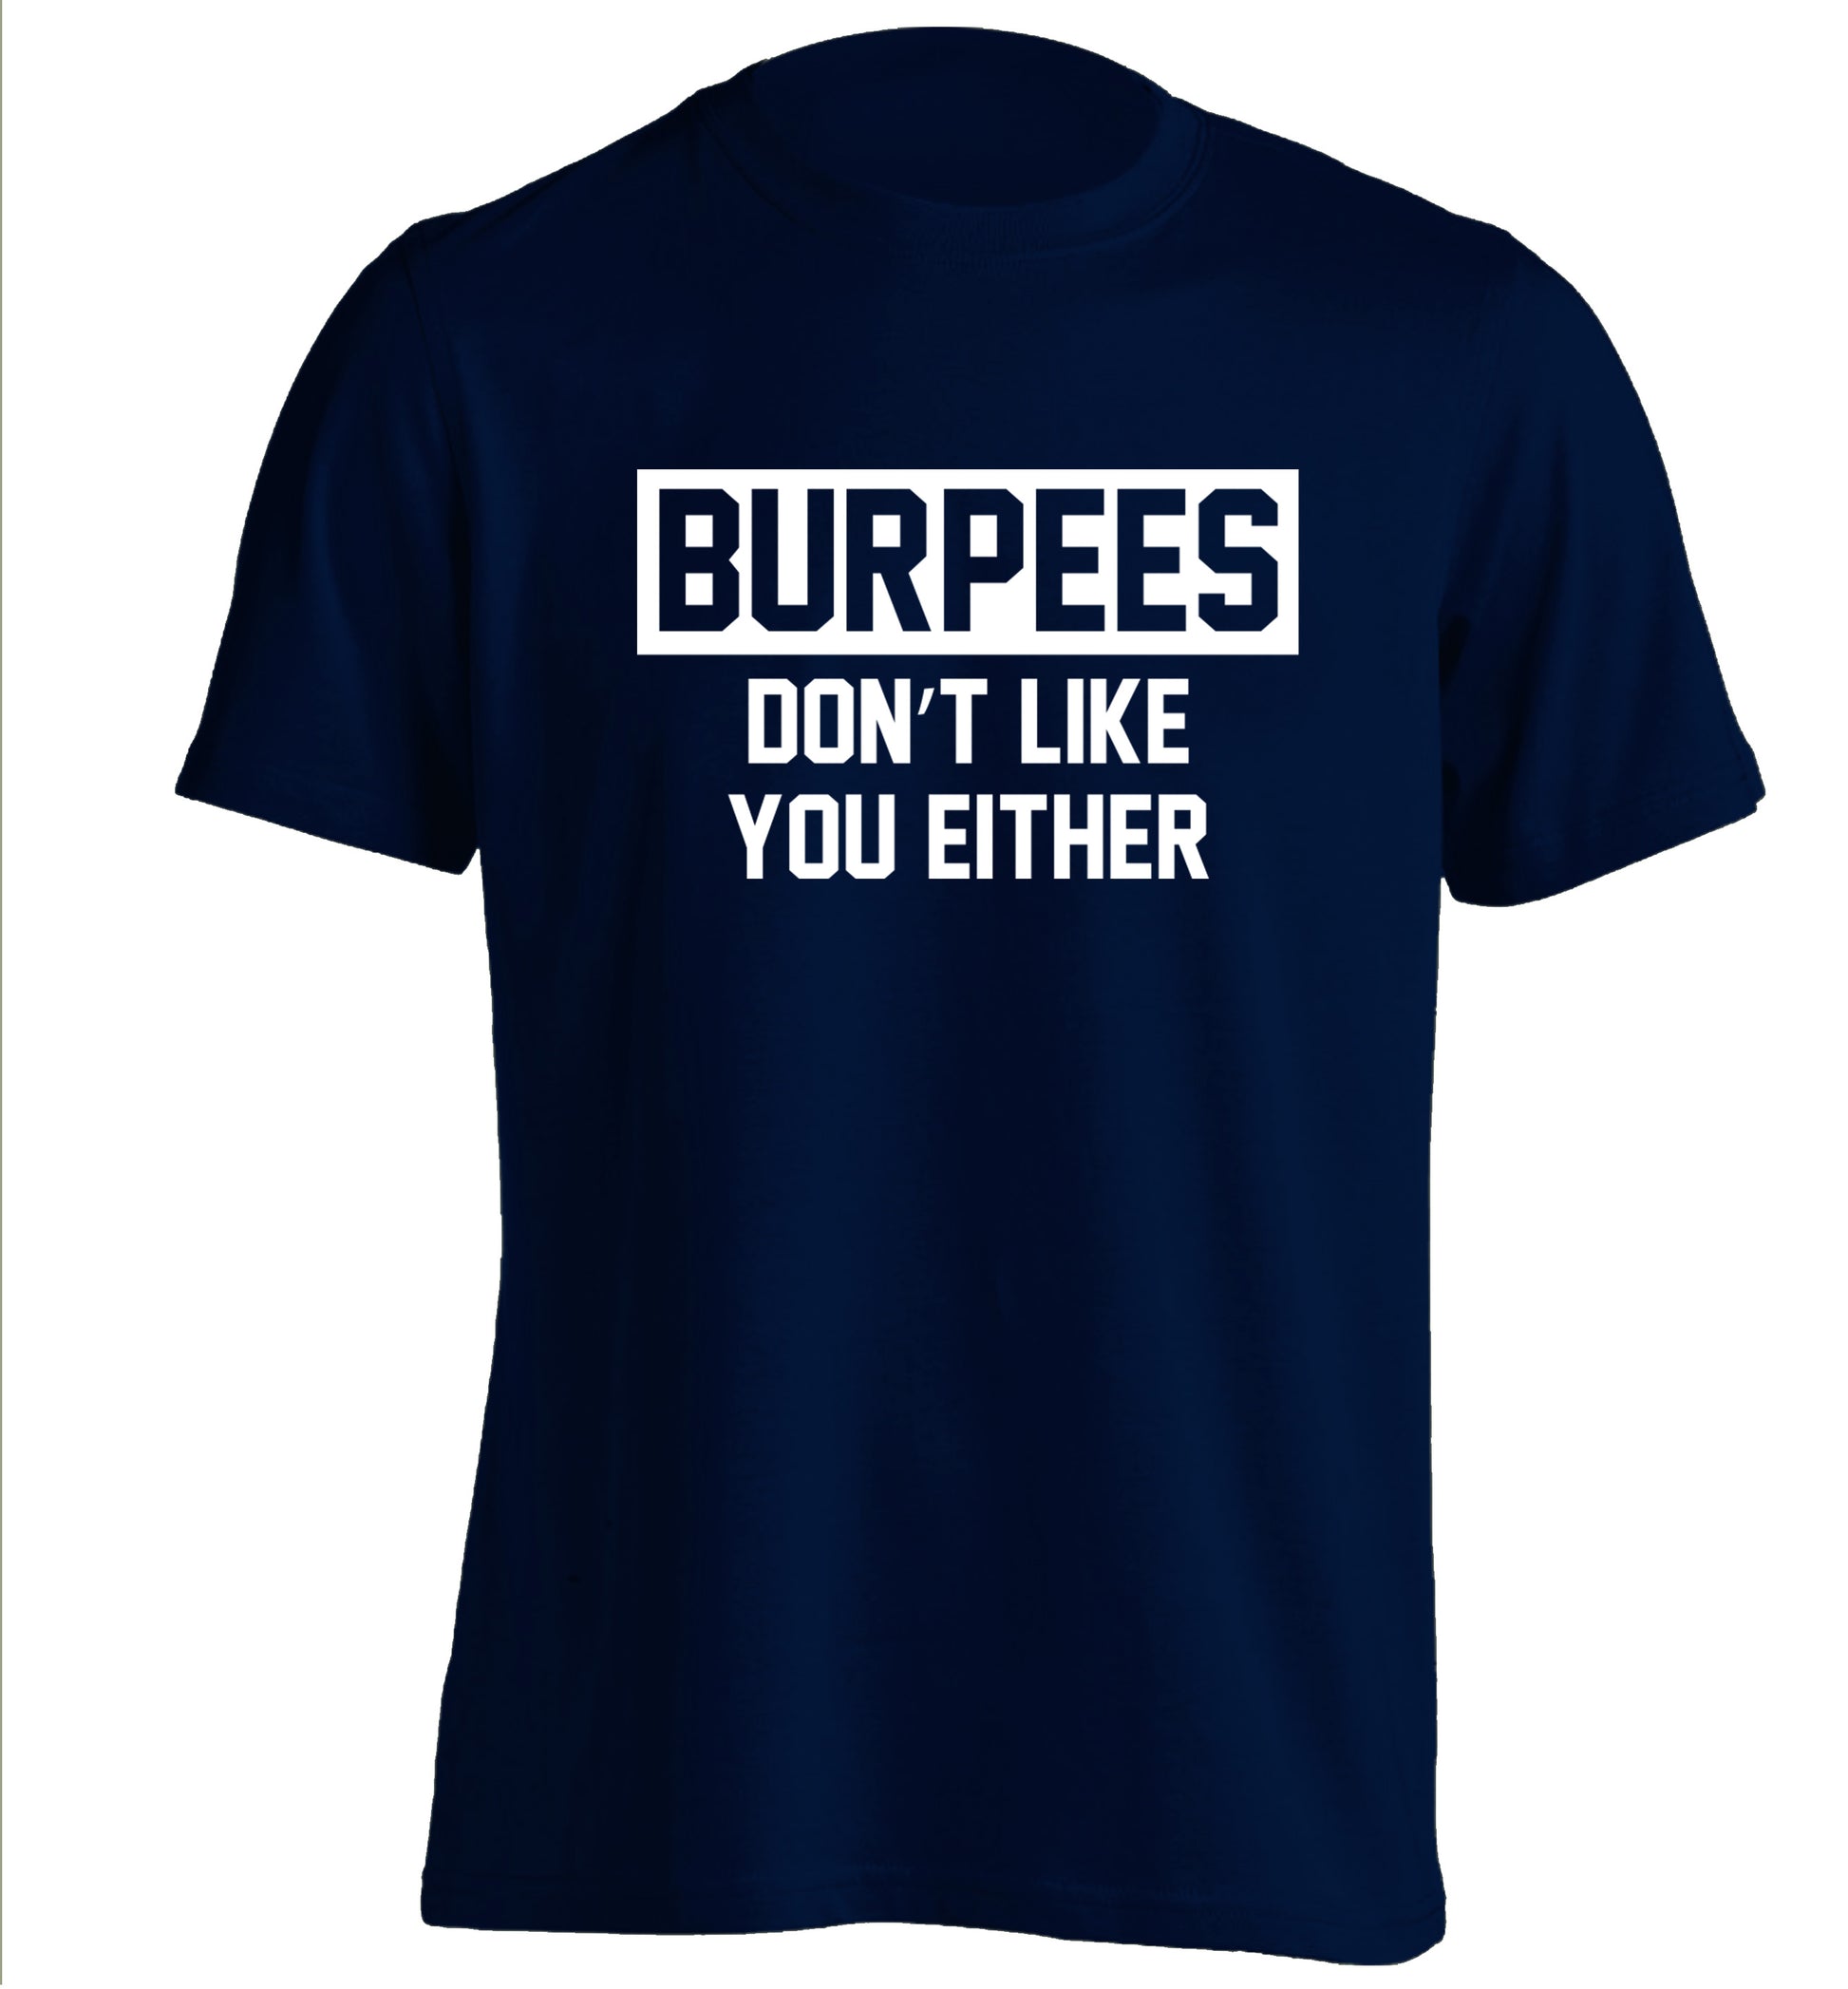 Burpees don't like you either adults unisex navy Tshirt 2XL